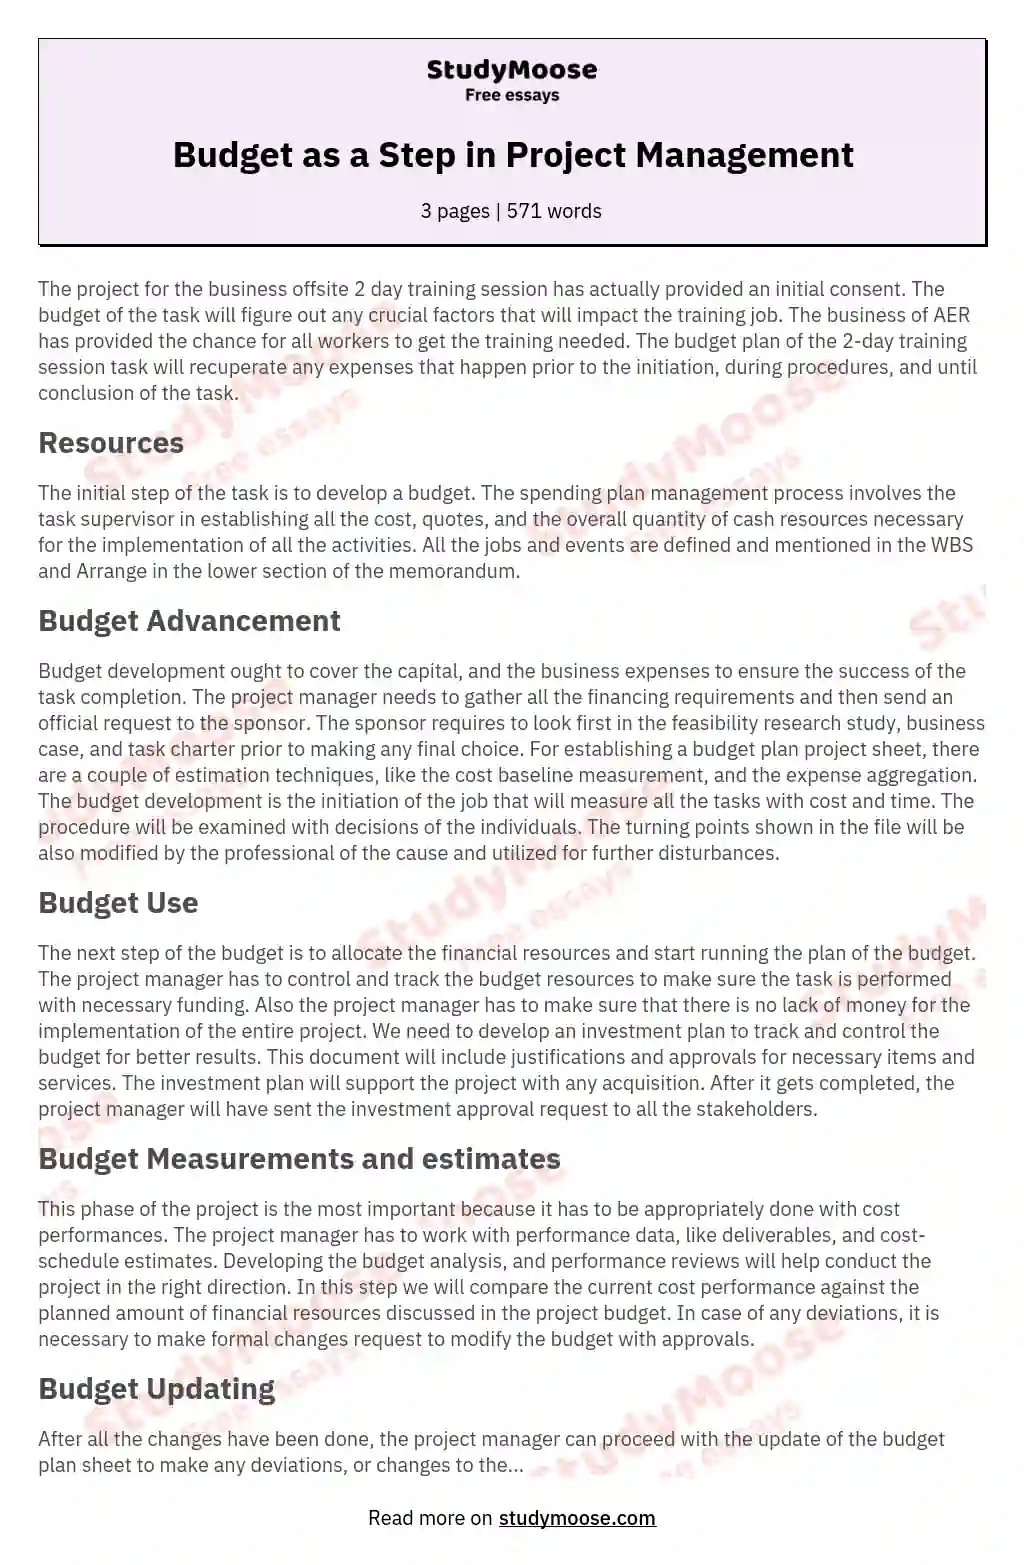 Budget as a Step in Project Management essay